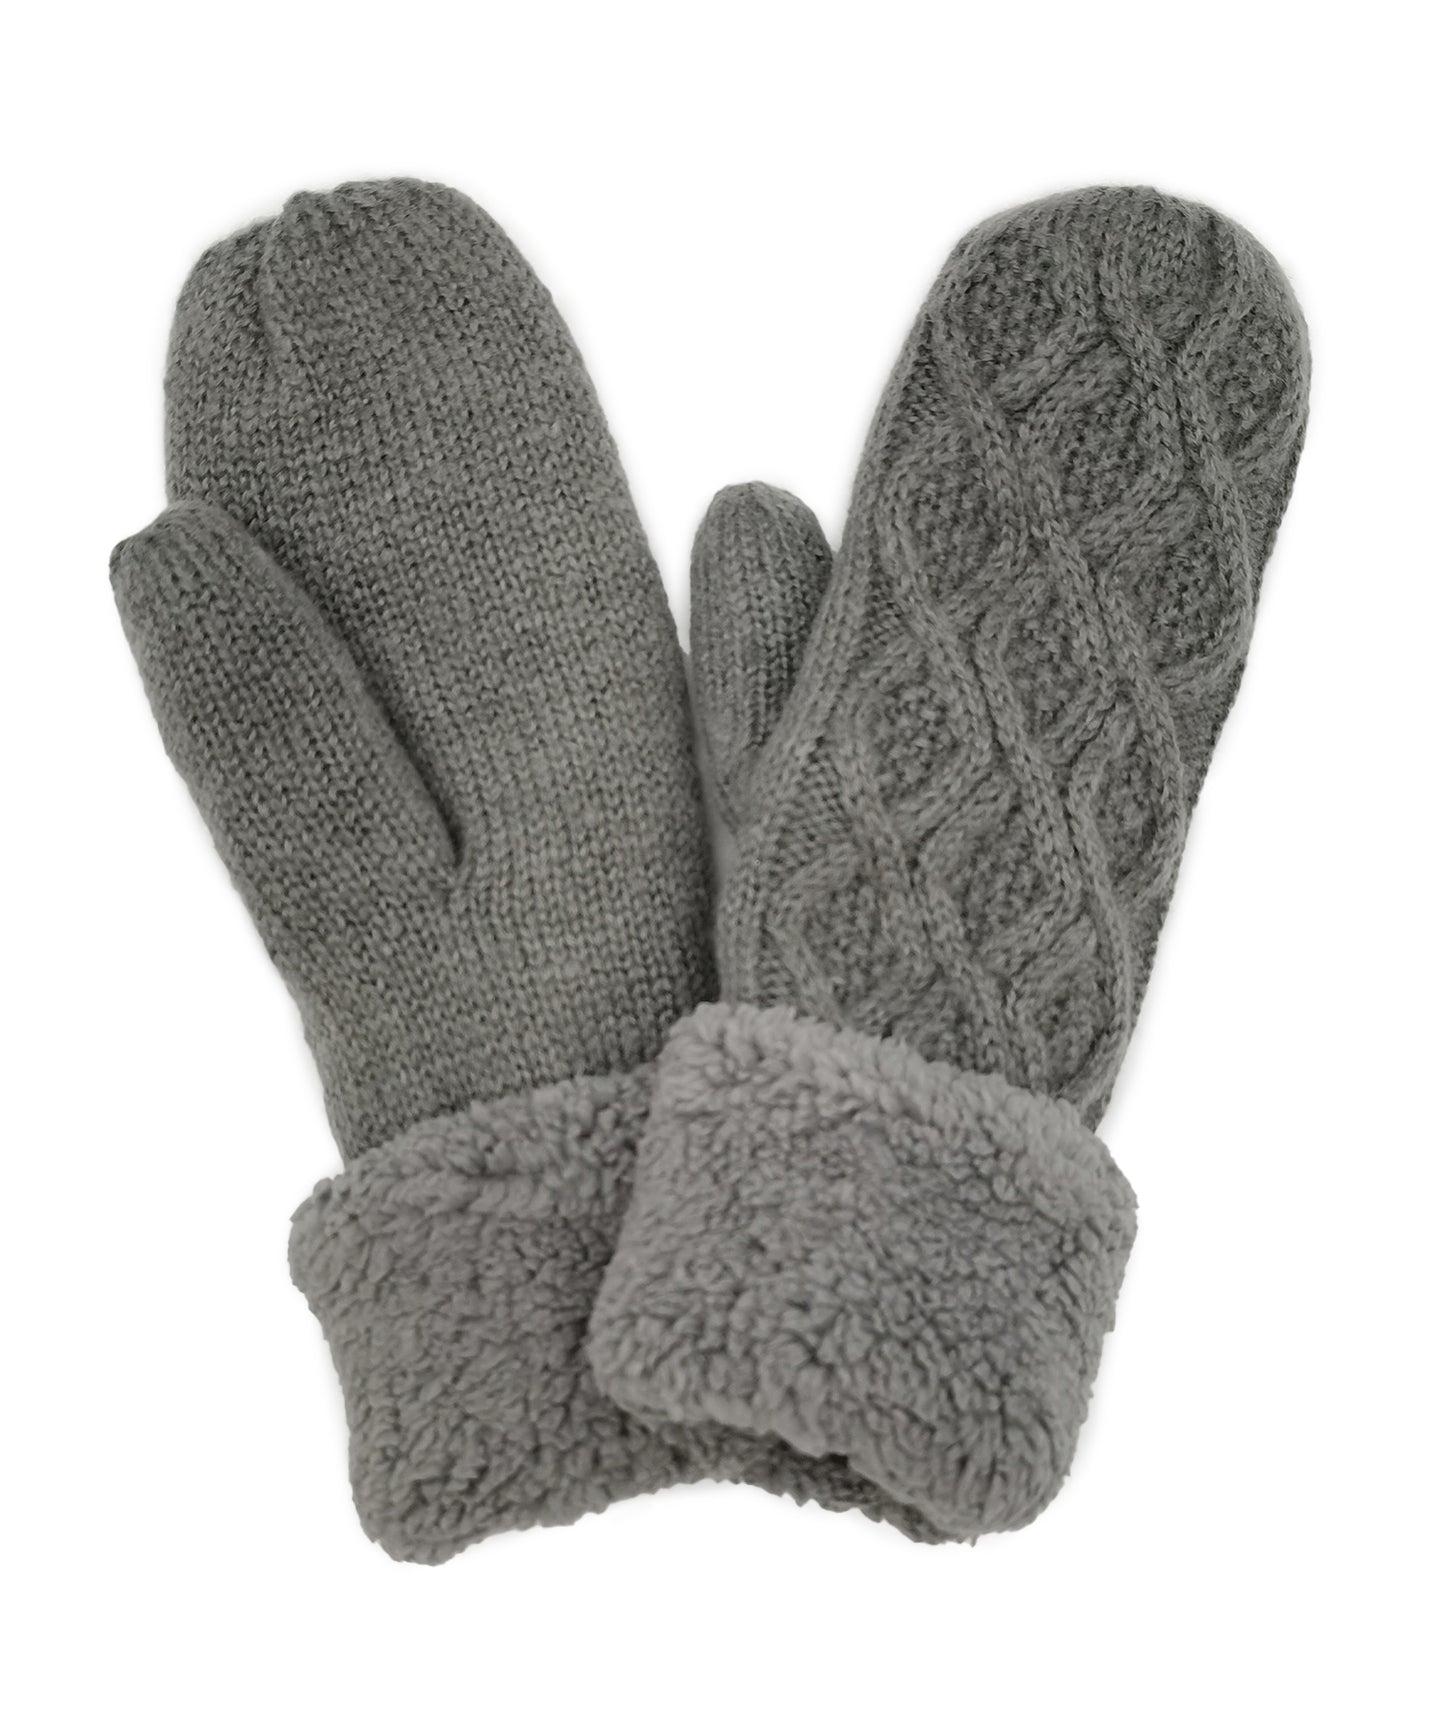 Shop for KW Fashion Cable Knit Sherpa Mittens at doeverythinginloveny.com wholesale fashion accessories